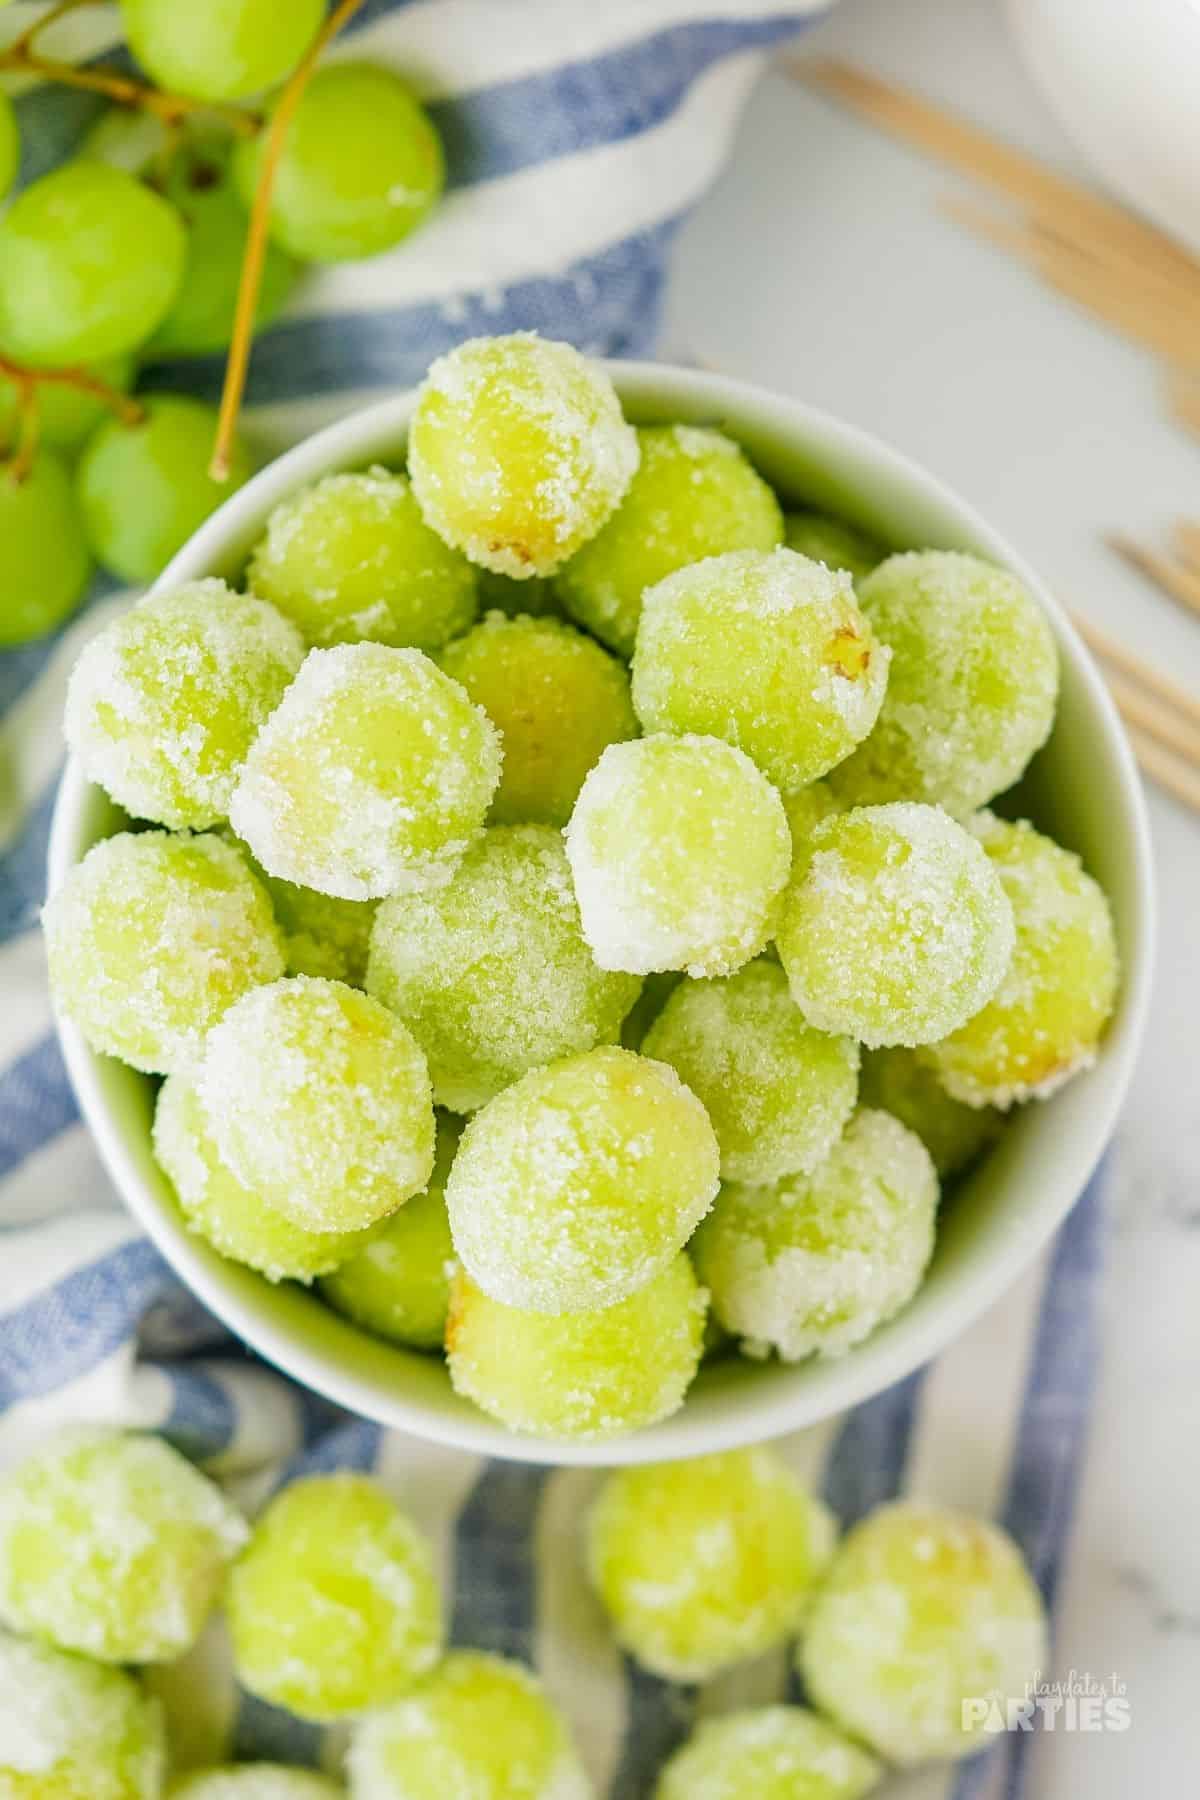 A bowl of sugared champagne grapes with a blue striped tea towel underneath.